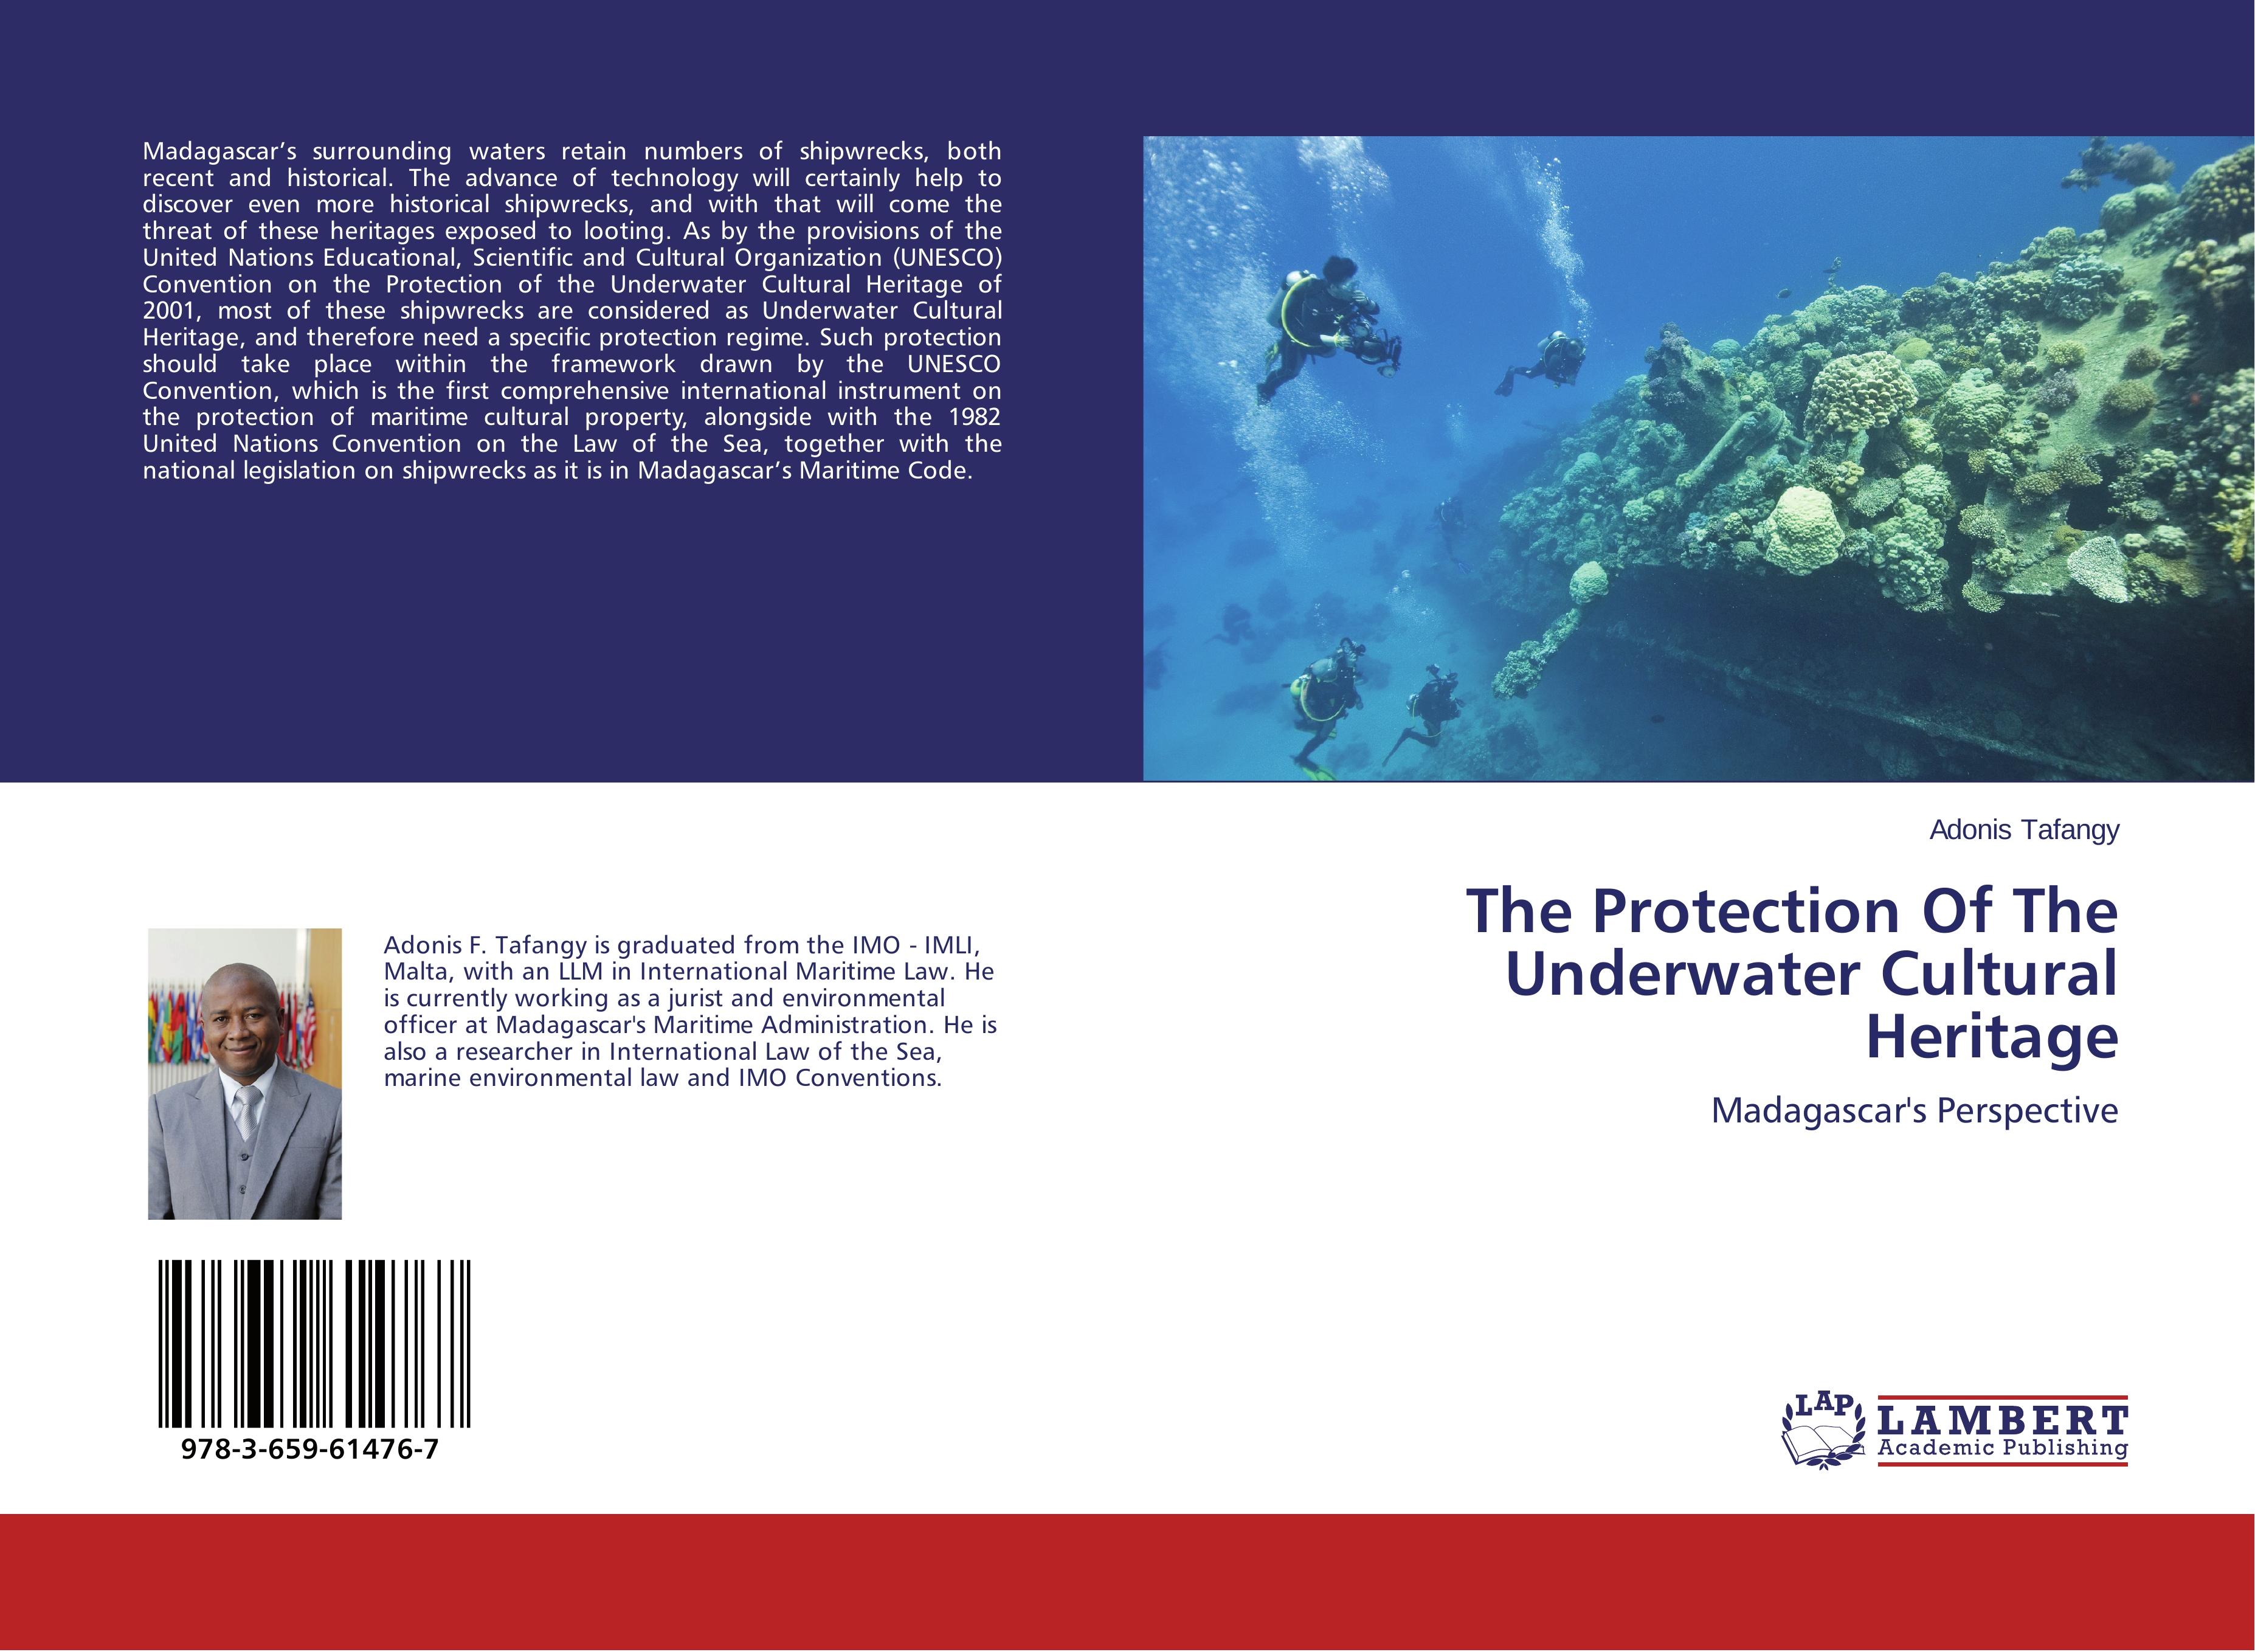 The Protection Of The Underwater Cultural Heritage - Adonis Tafangy